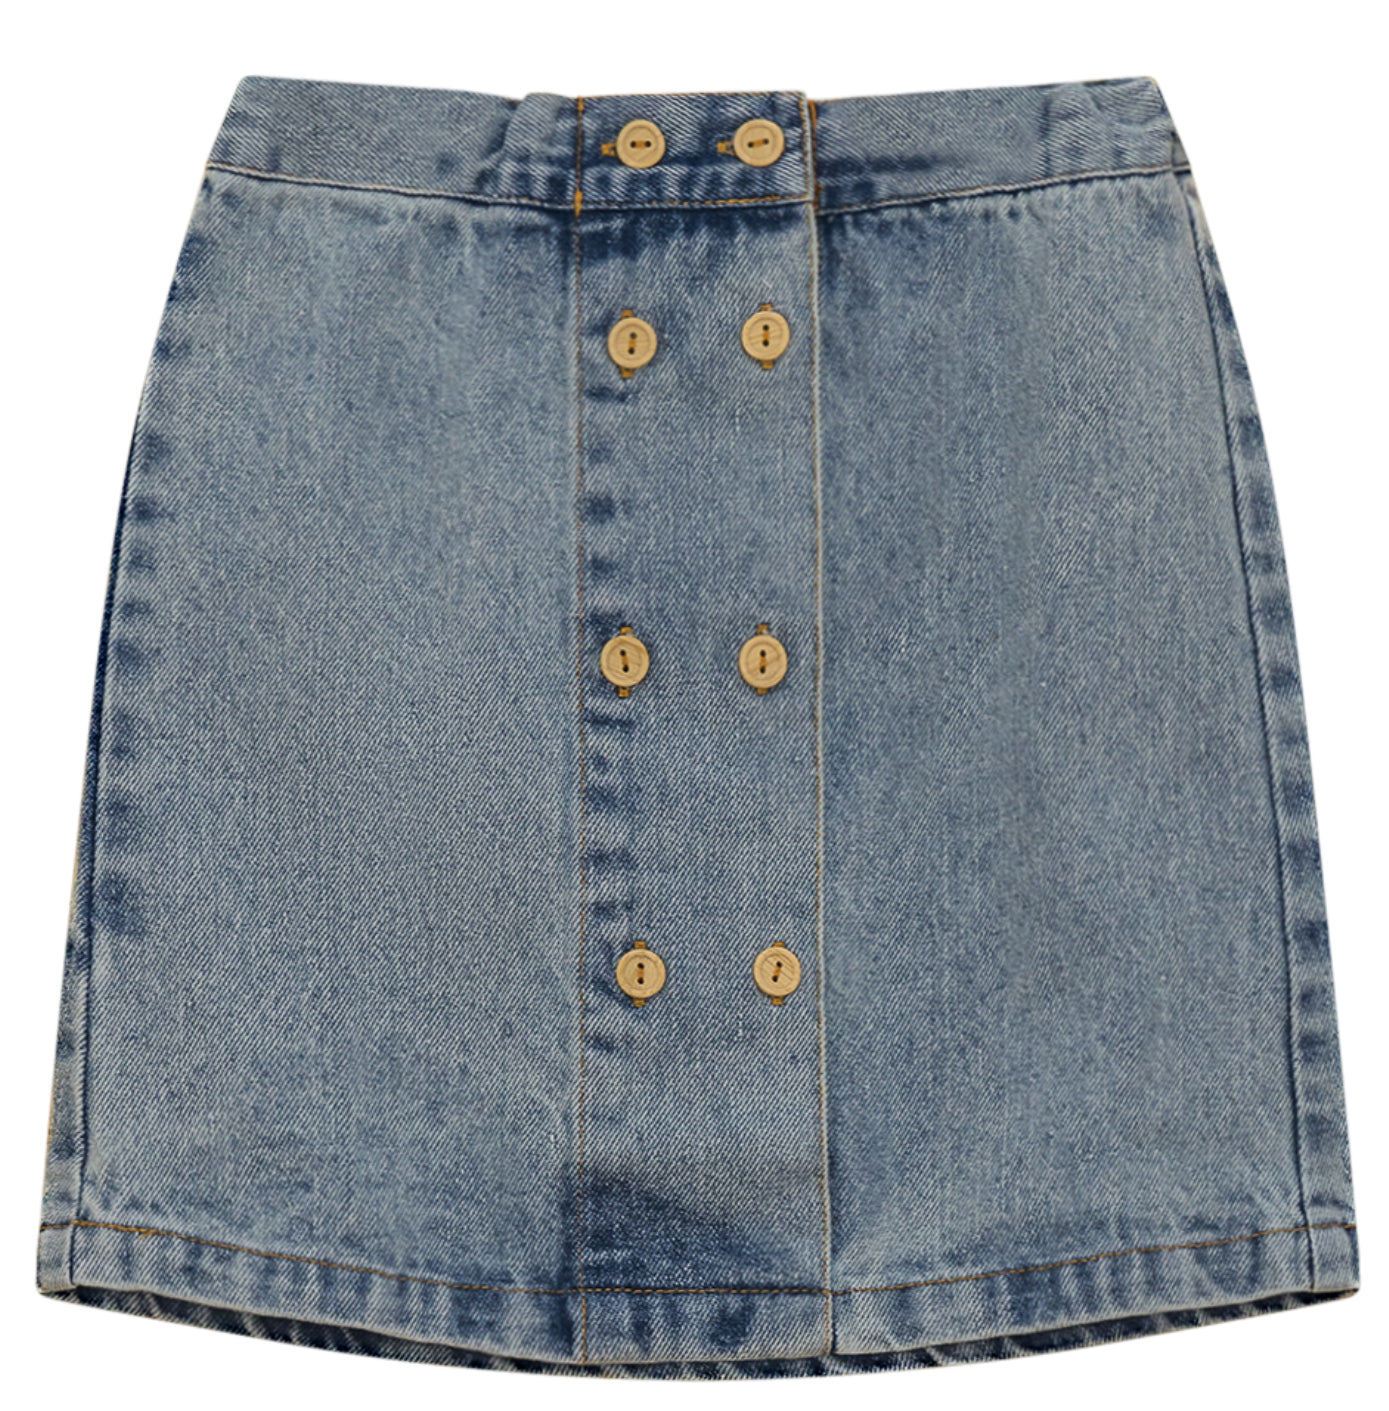 THE DOUBLE PRESS BUTTON SKIRT